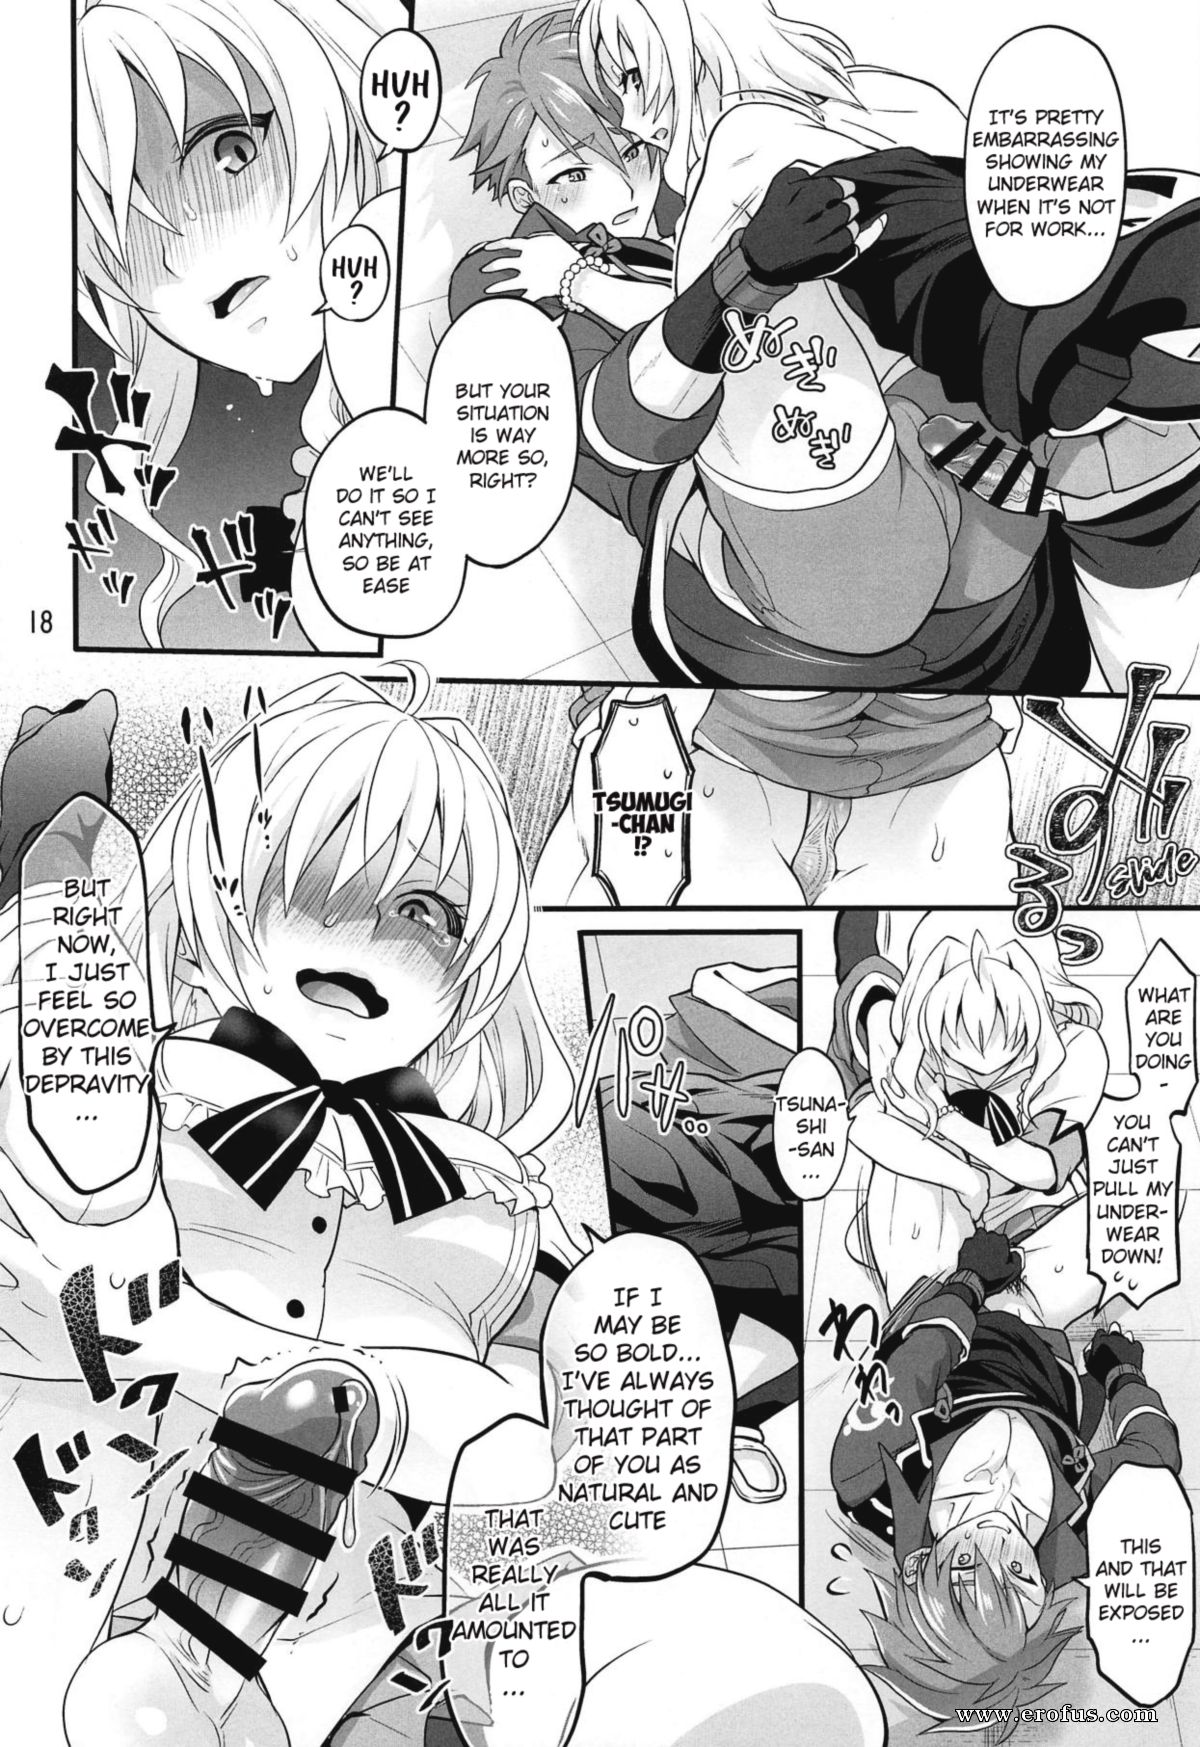 Embarrassed Futa Hentai Anime Porn - Page 19 | hentai -and-manga-english/temparing/to-think-as-an-office-manager-after-becoming-a- futanari-id-asault-the-famous-idol-ryunosuke-san | Erofus - Sex and Porn  Comics